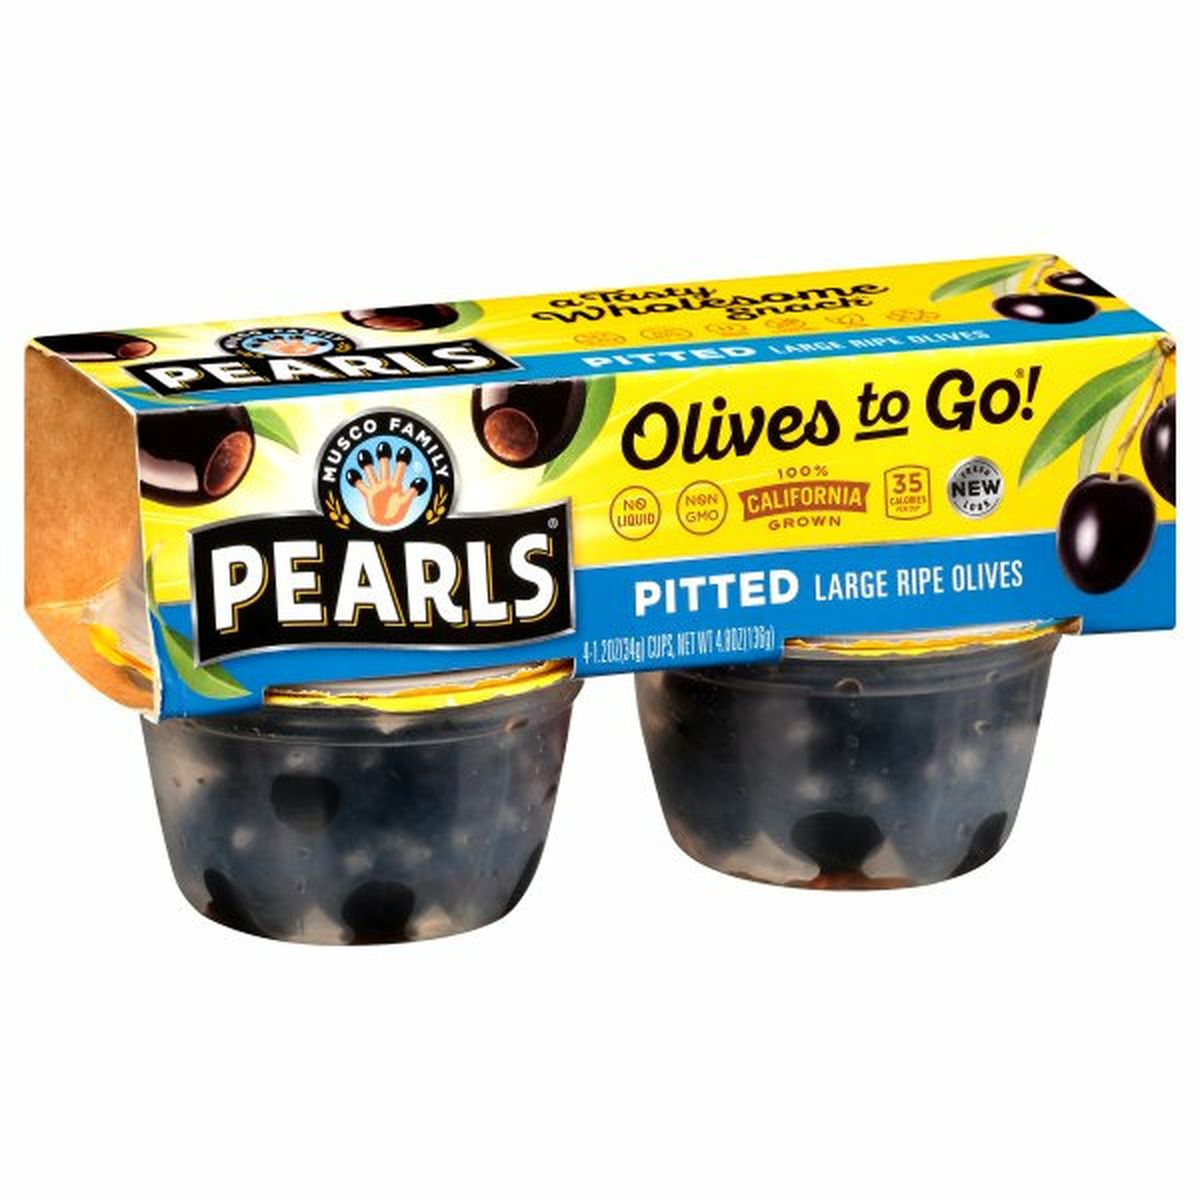 Calories in Pearls Olives, Ripe, Pitted, Large